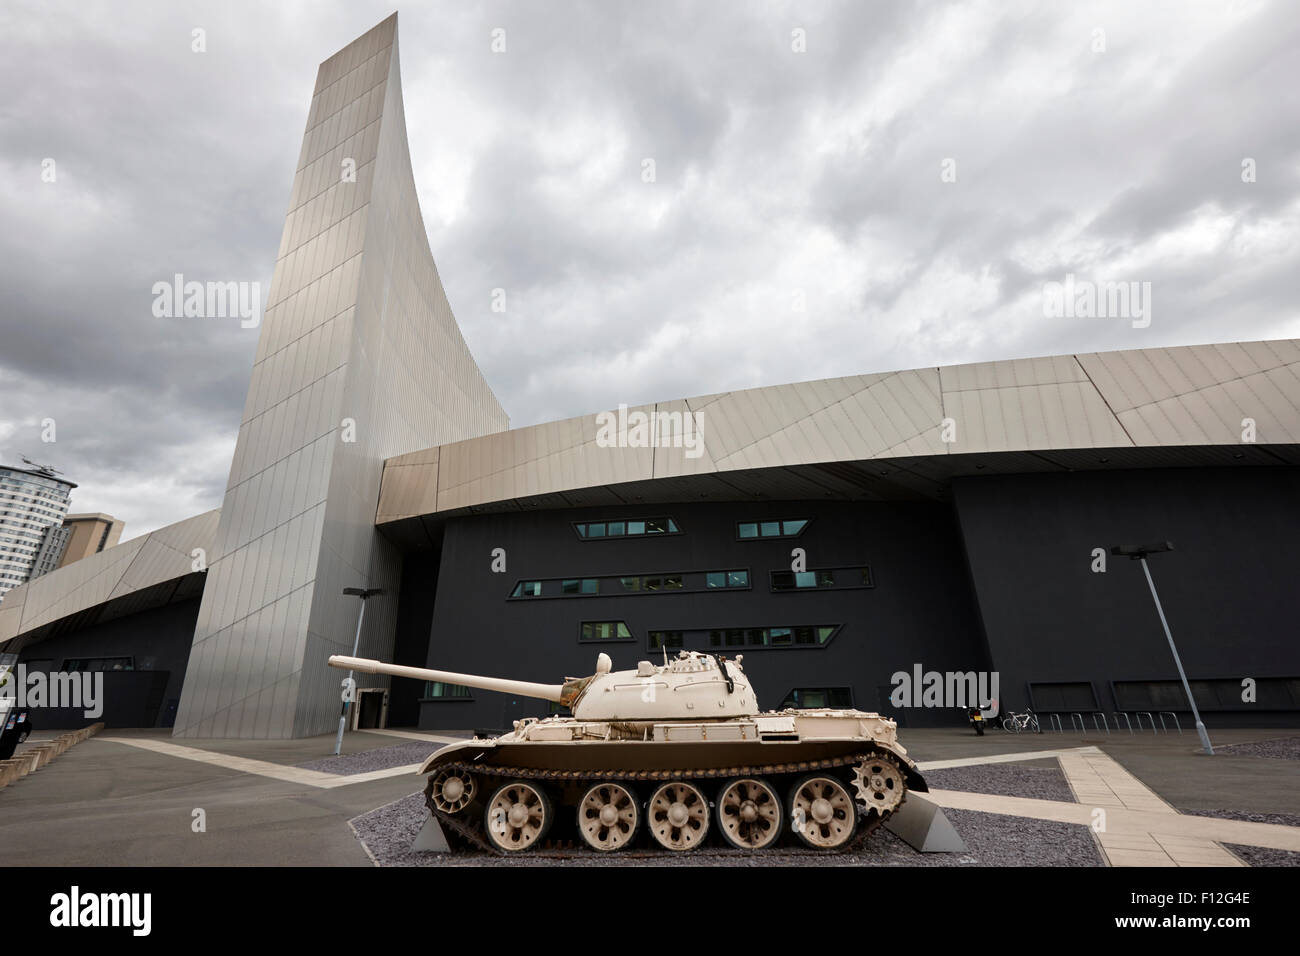 Imperial War Museum North Manchester uk iwm Banque D'Images